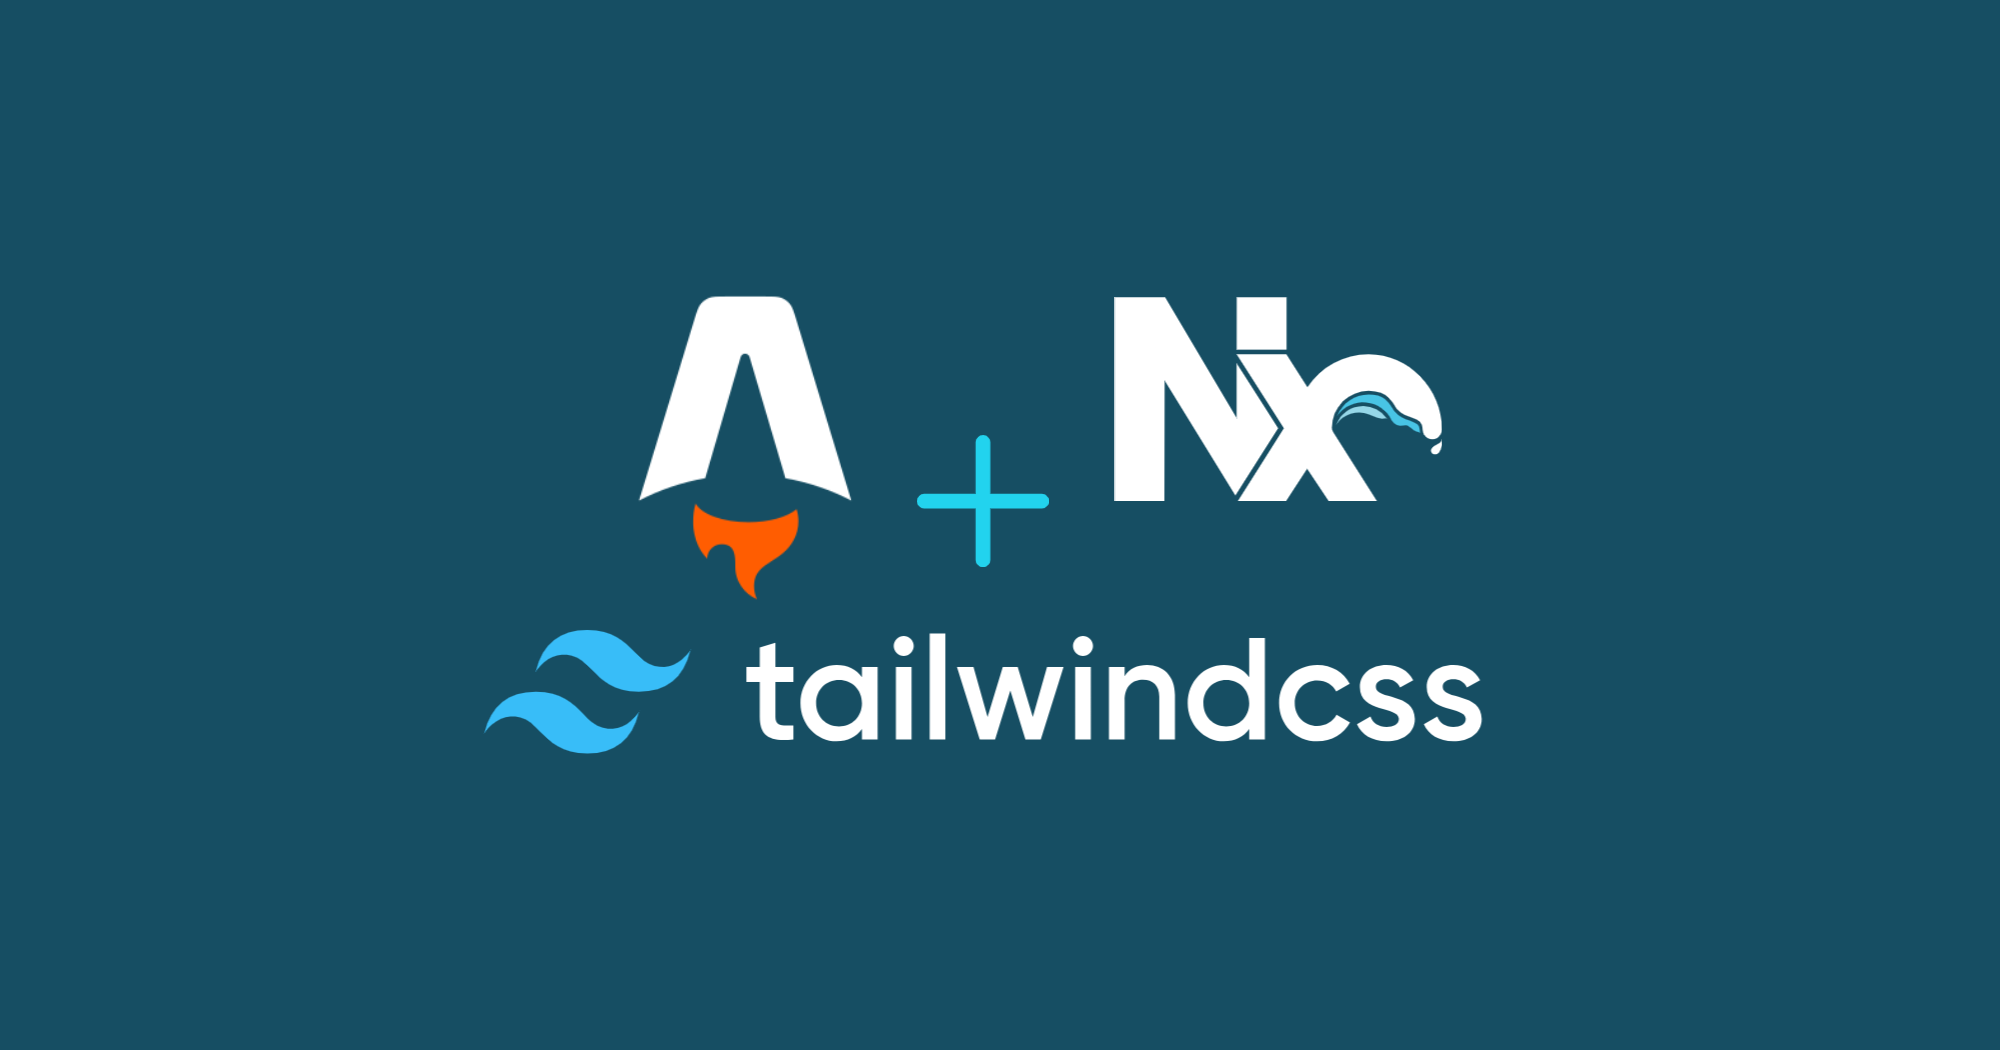 Astro, Tailwind CSS, and Nx logos